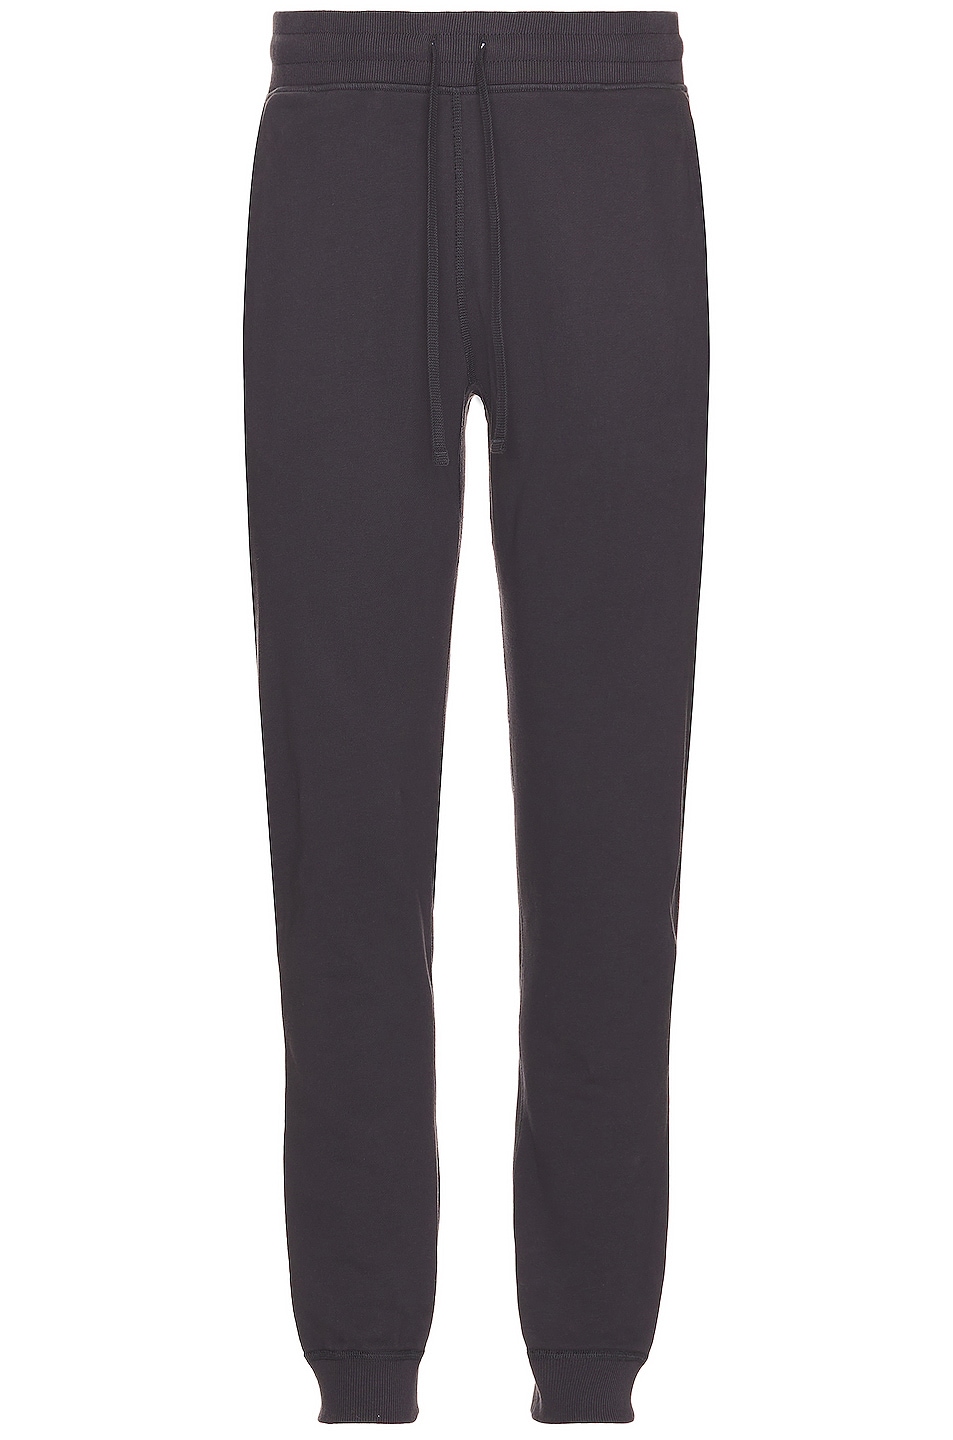 Reigning Champ Midweight Terry Slim Sweatpant in Midnight | FWRD